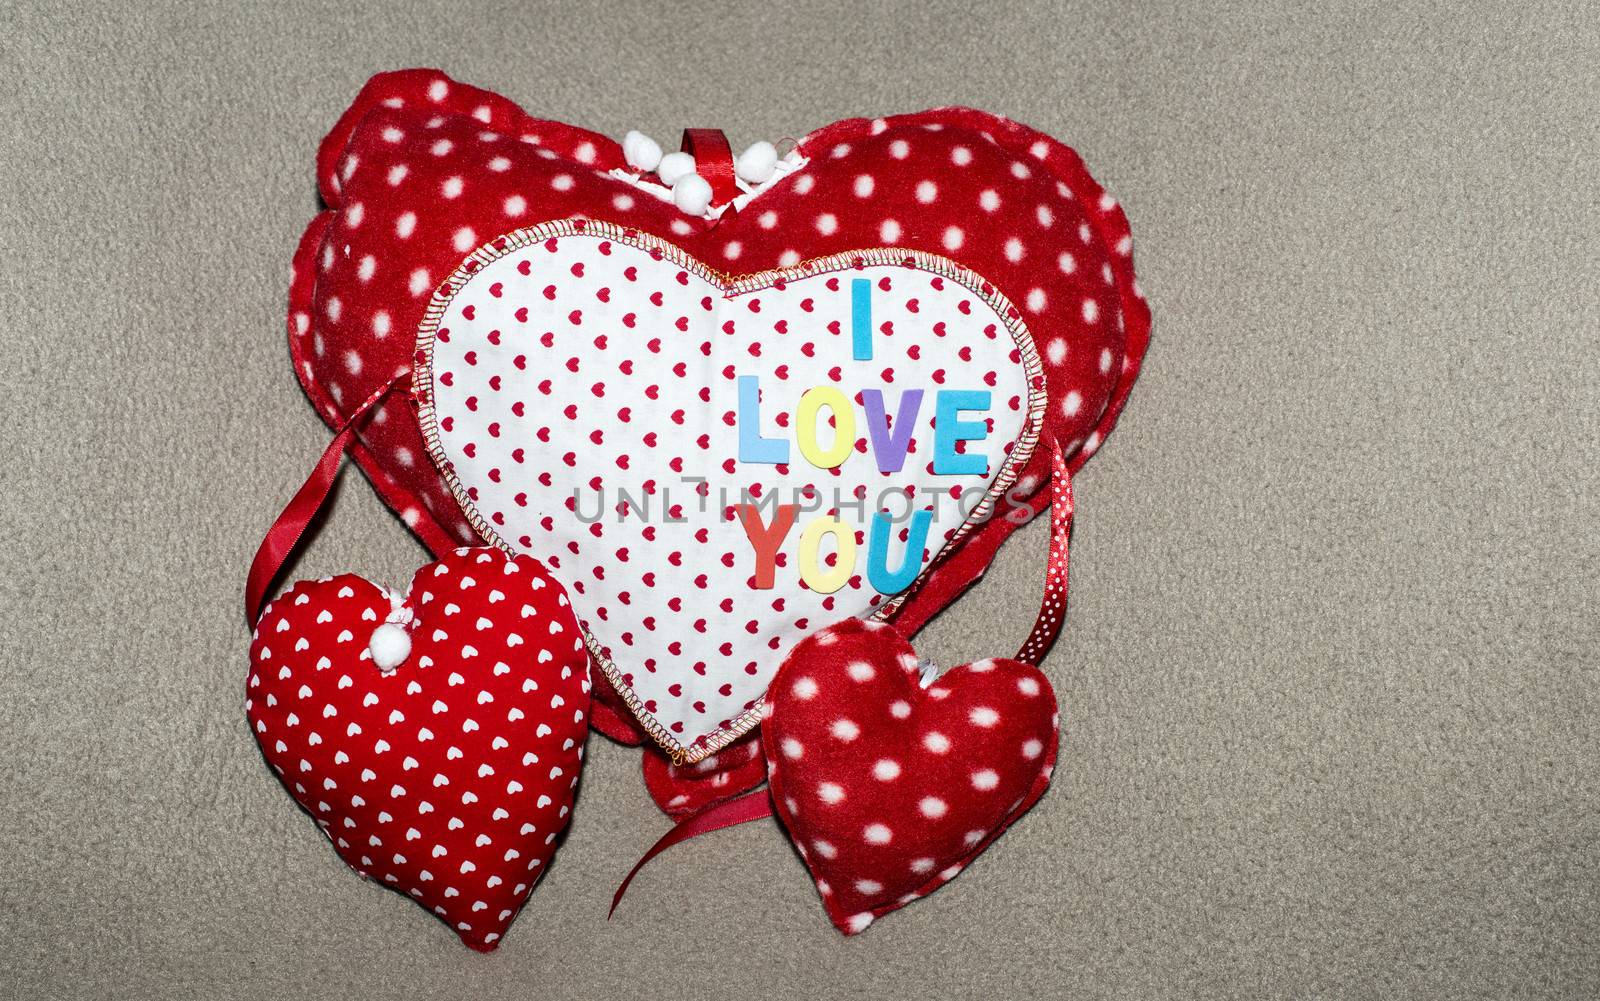 hand made hart shape with I love you text by compuinfoto